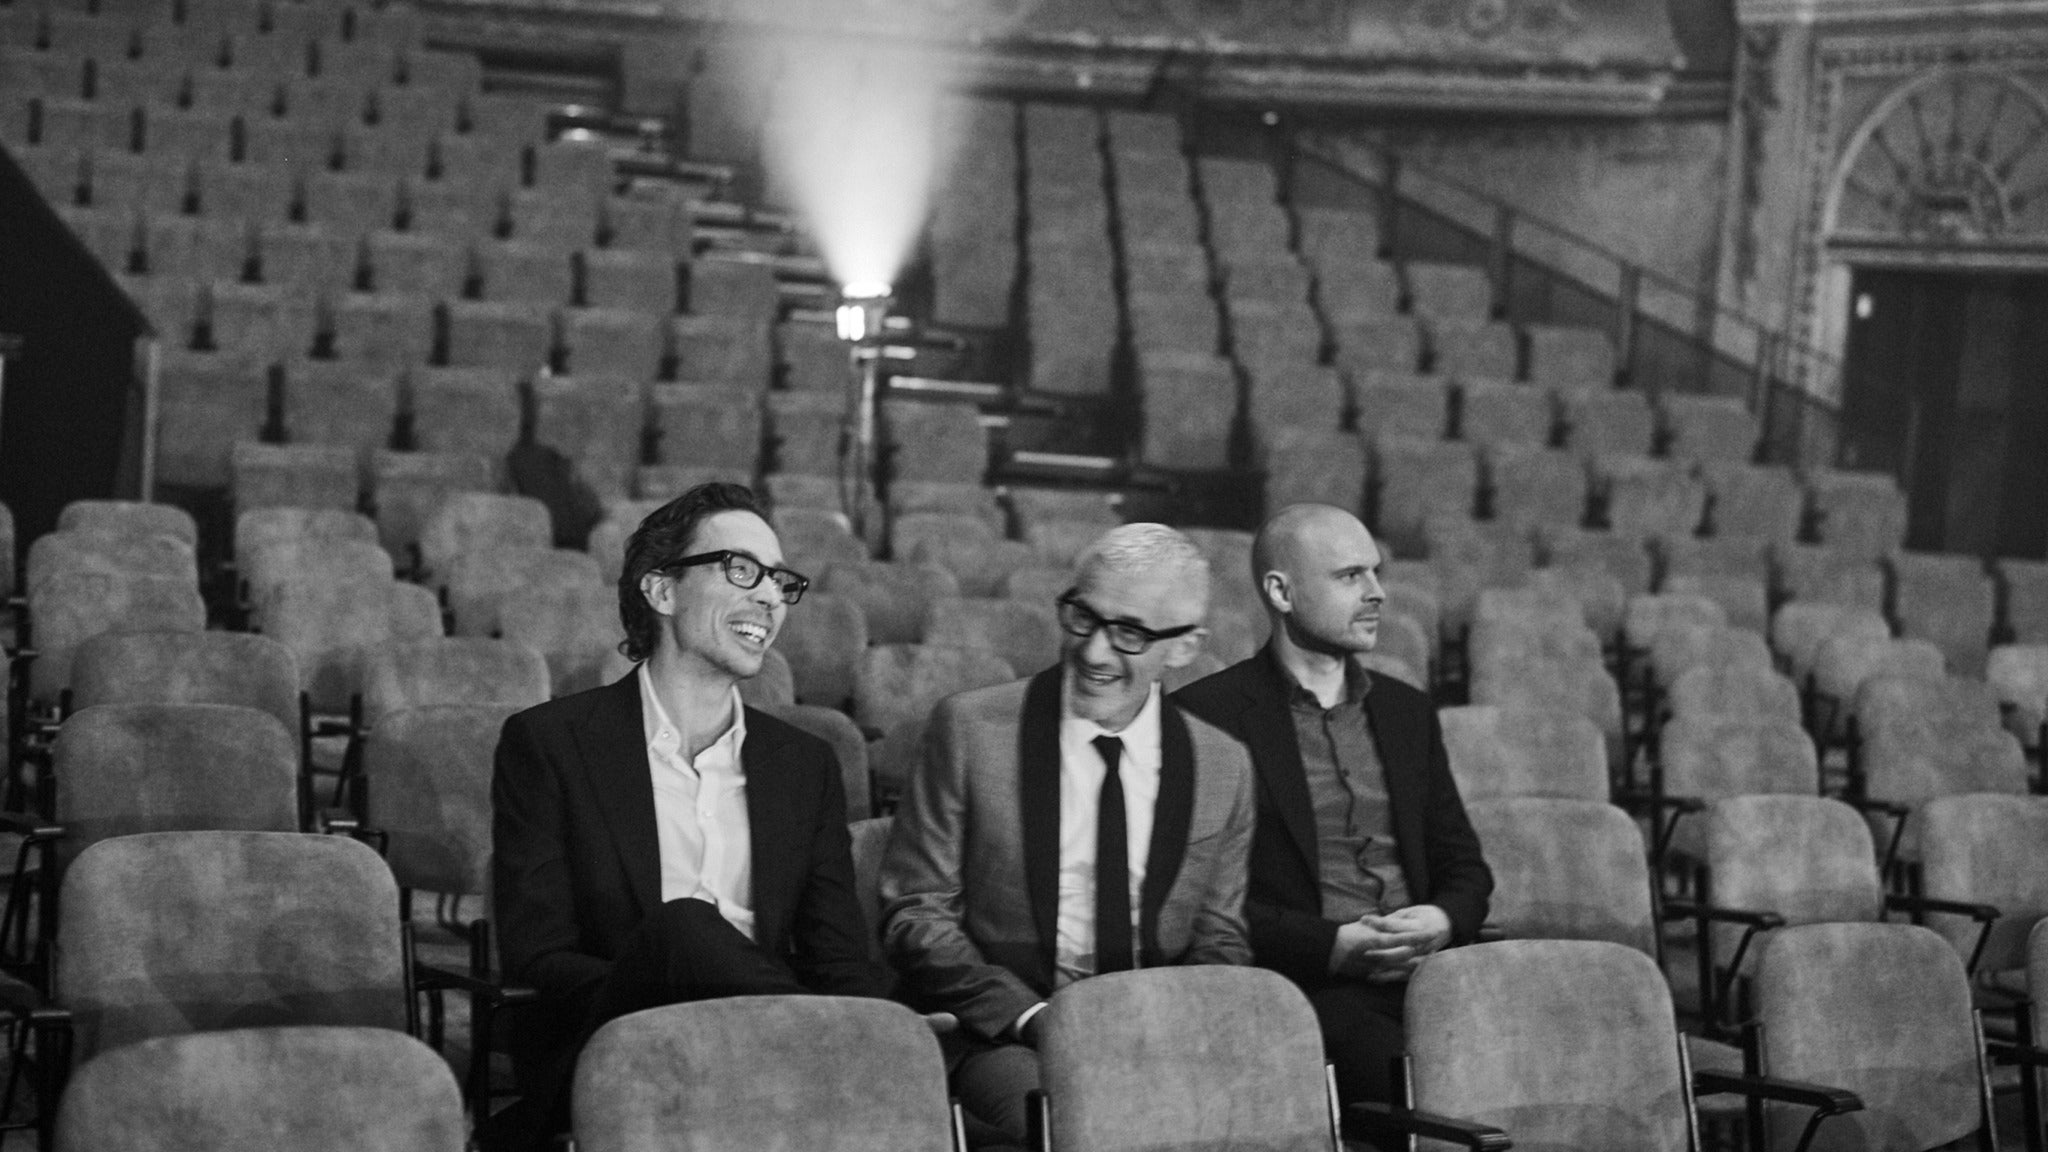 Above & Beyond - Anjunafamily Reunion Tour pre-sale code for early tickets in Chicago